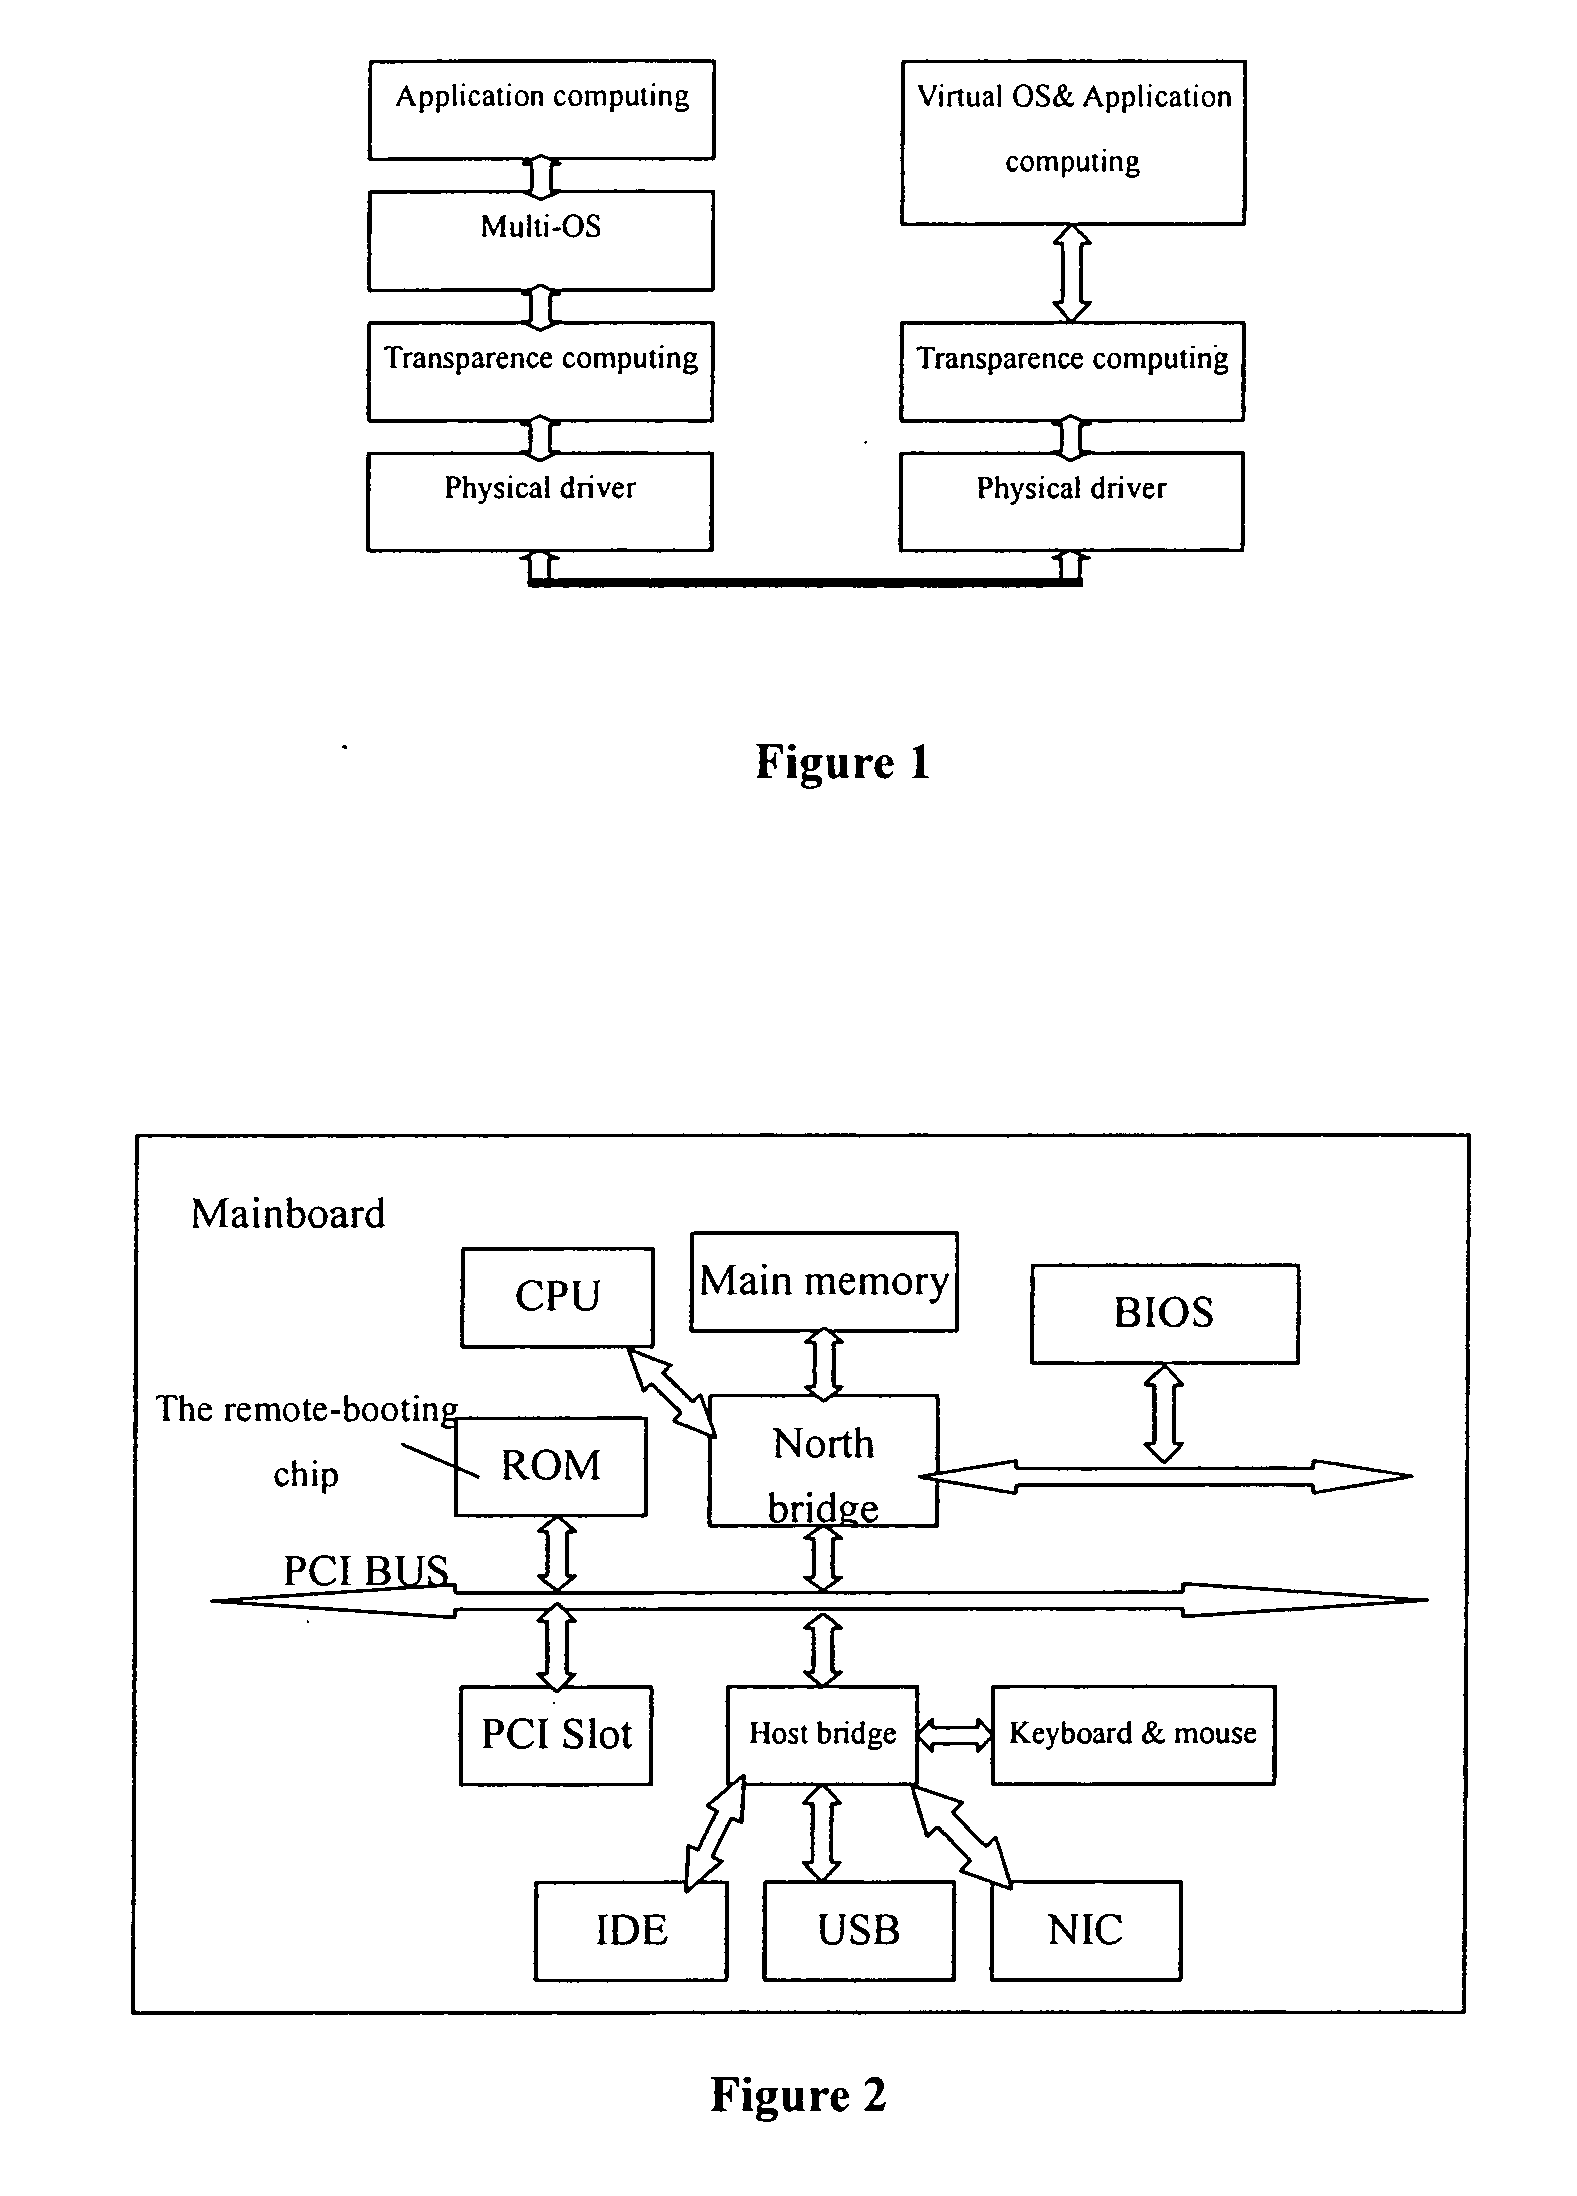 Method and computing system for transparence computing on the computer network